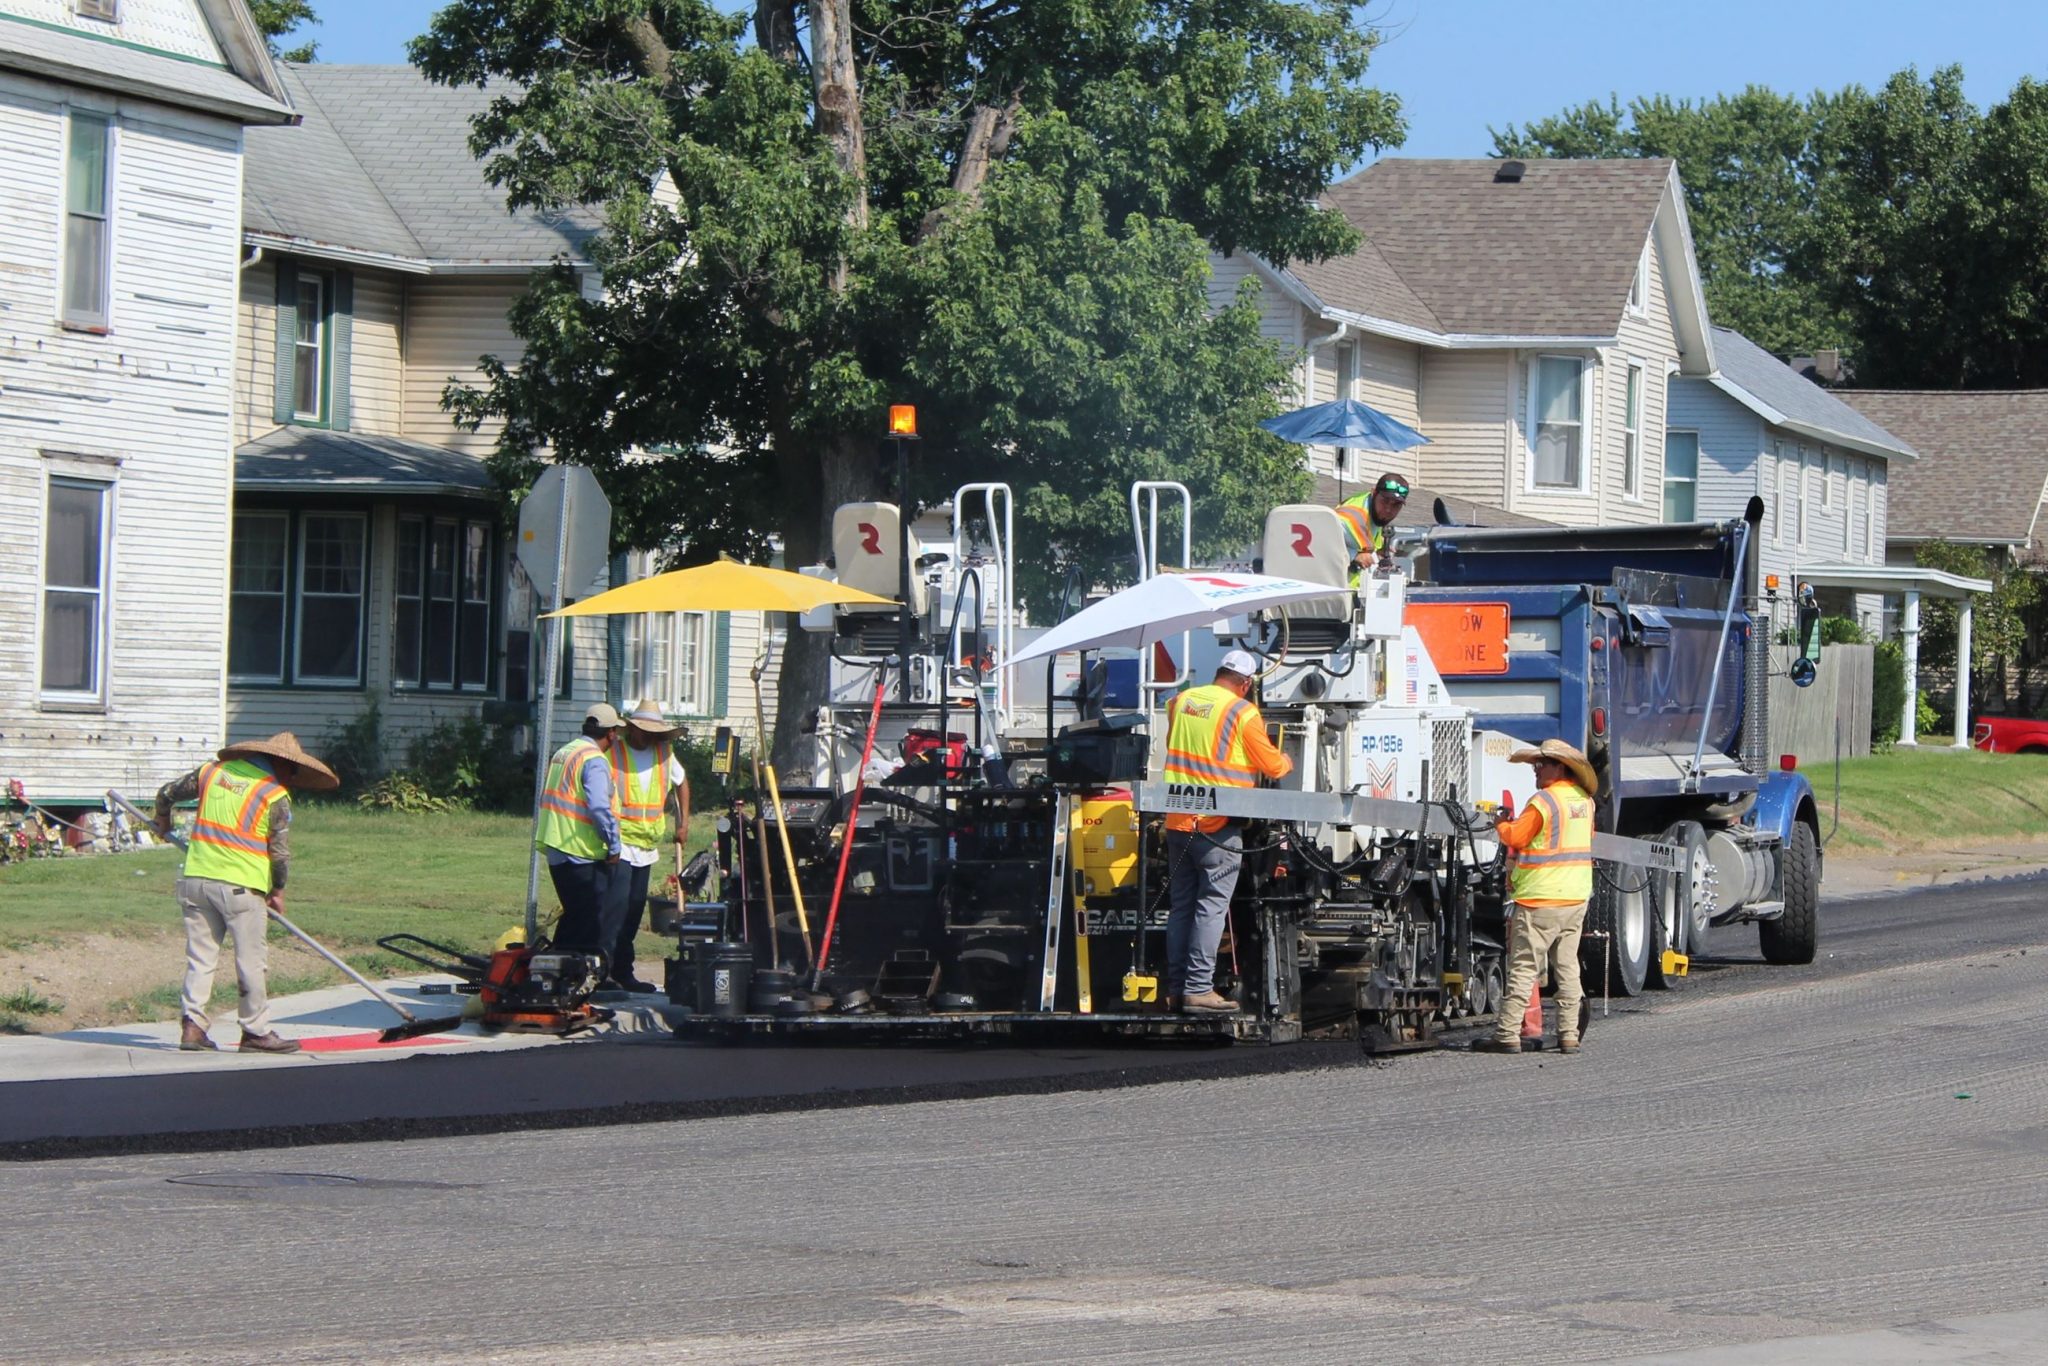 Expect traffic delays as asphalt overlay continues on Park Avenue